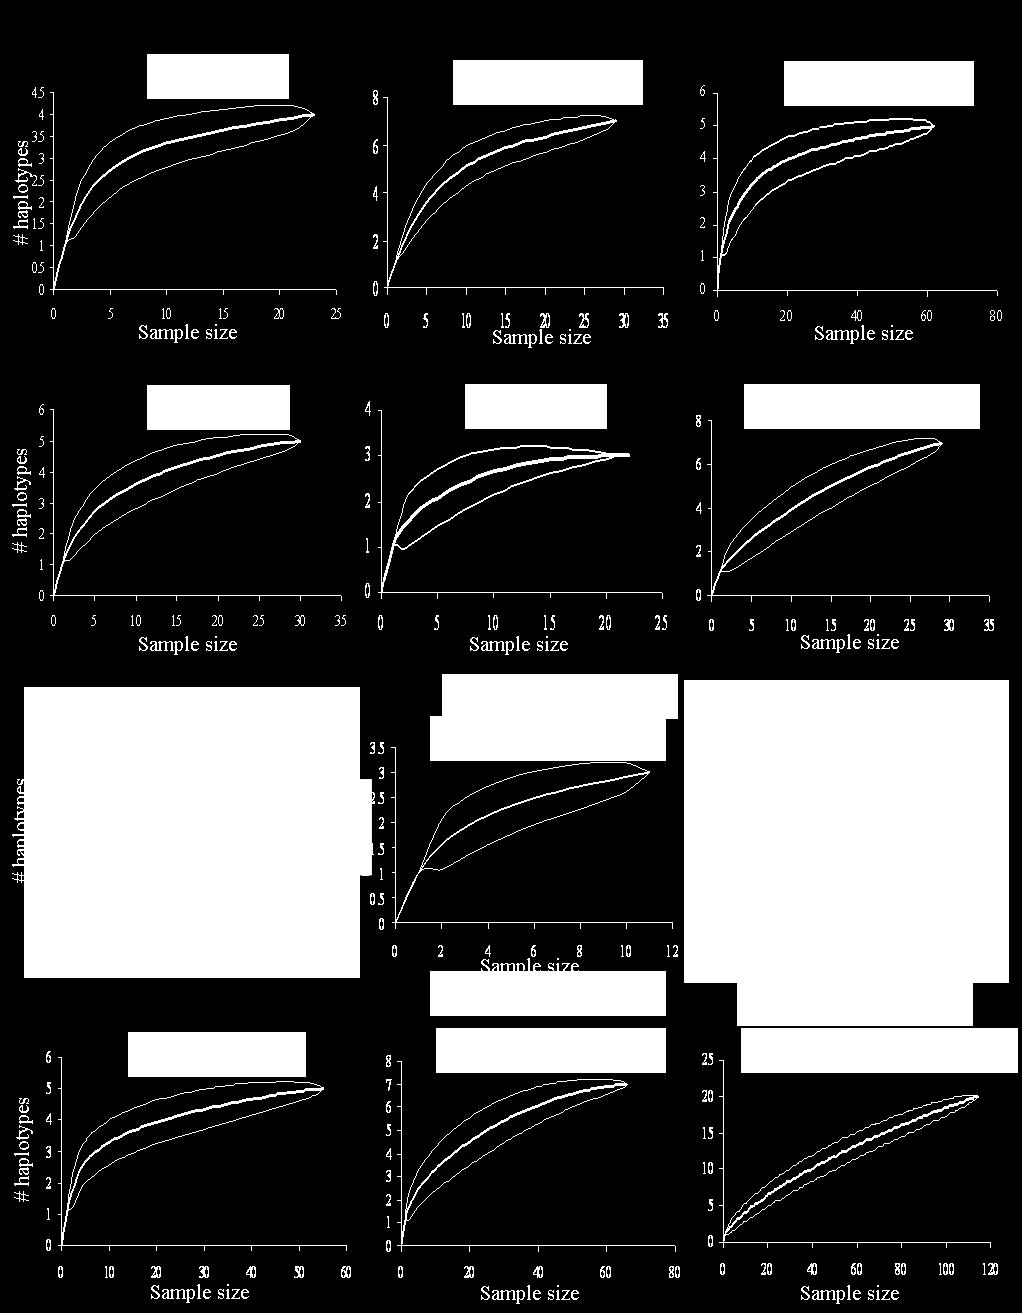 Figure 3.4. Rarefraction curves for each Mus.